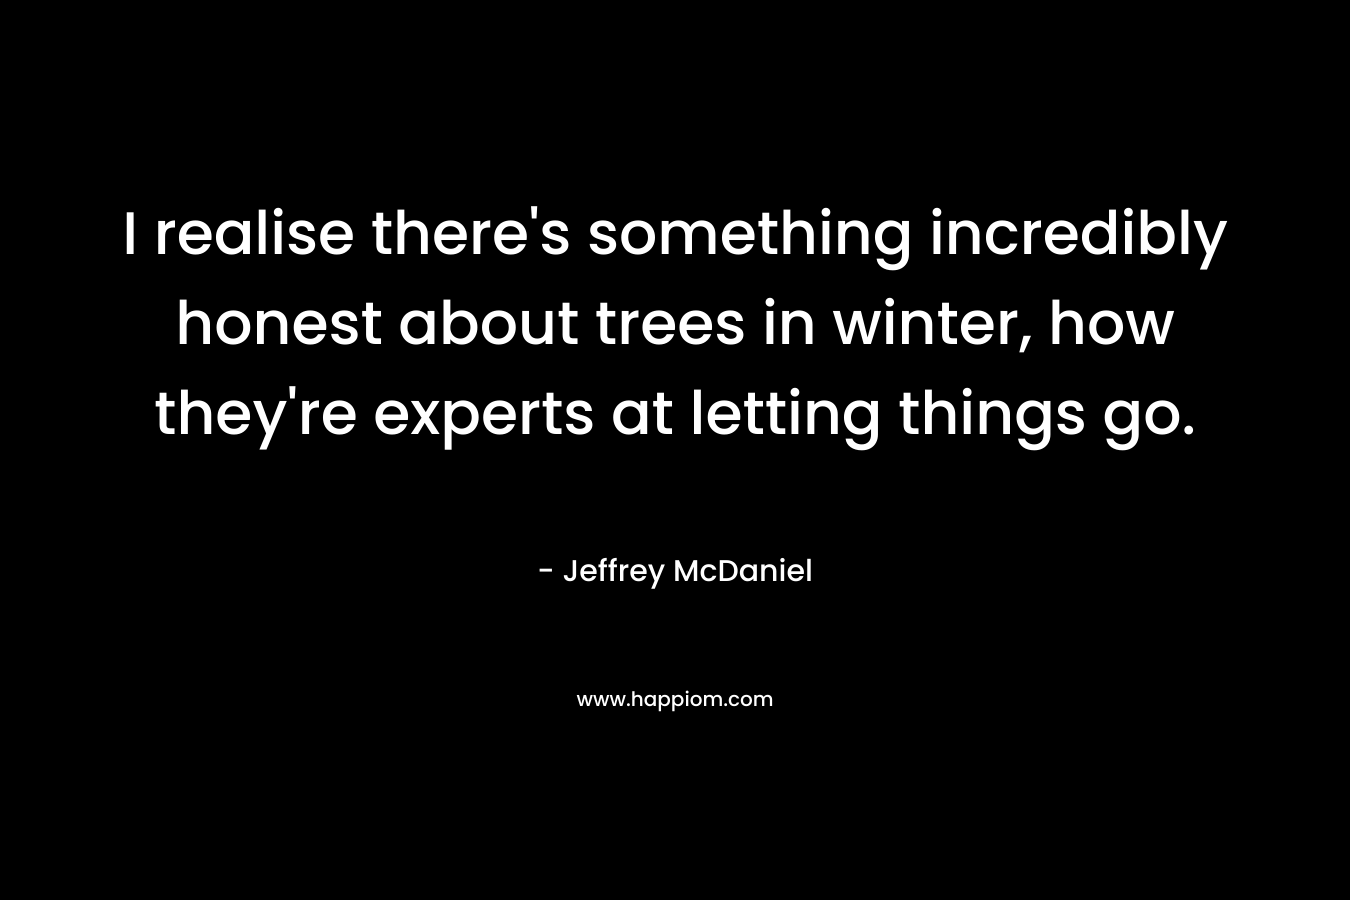 I realise there’s something incredibly honest about trees in winter, how they’re experts at letting things go. – Jeffrey McDaniel